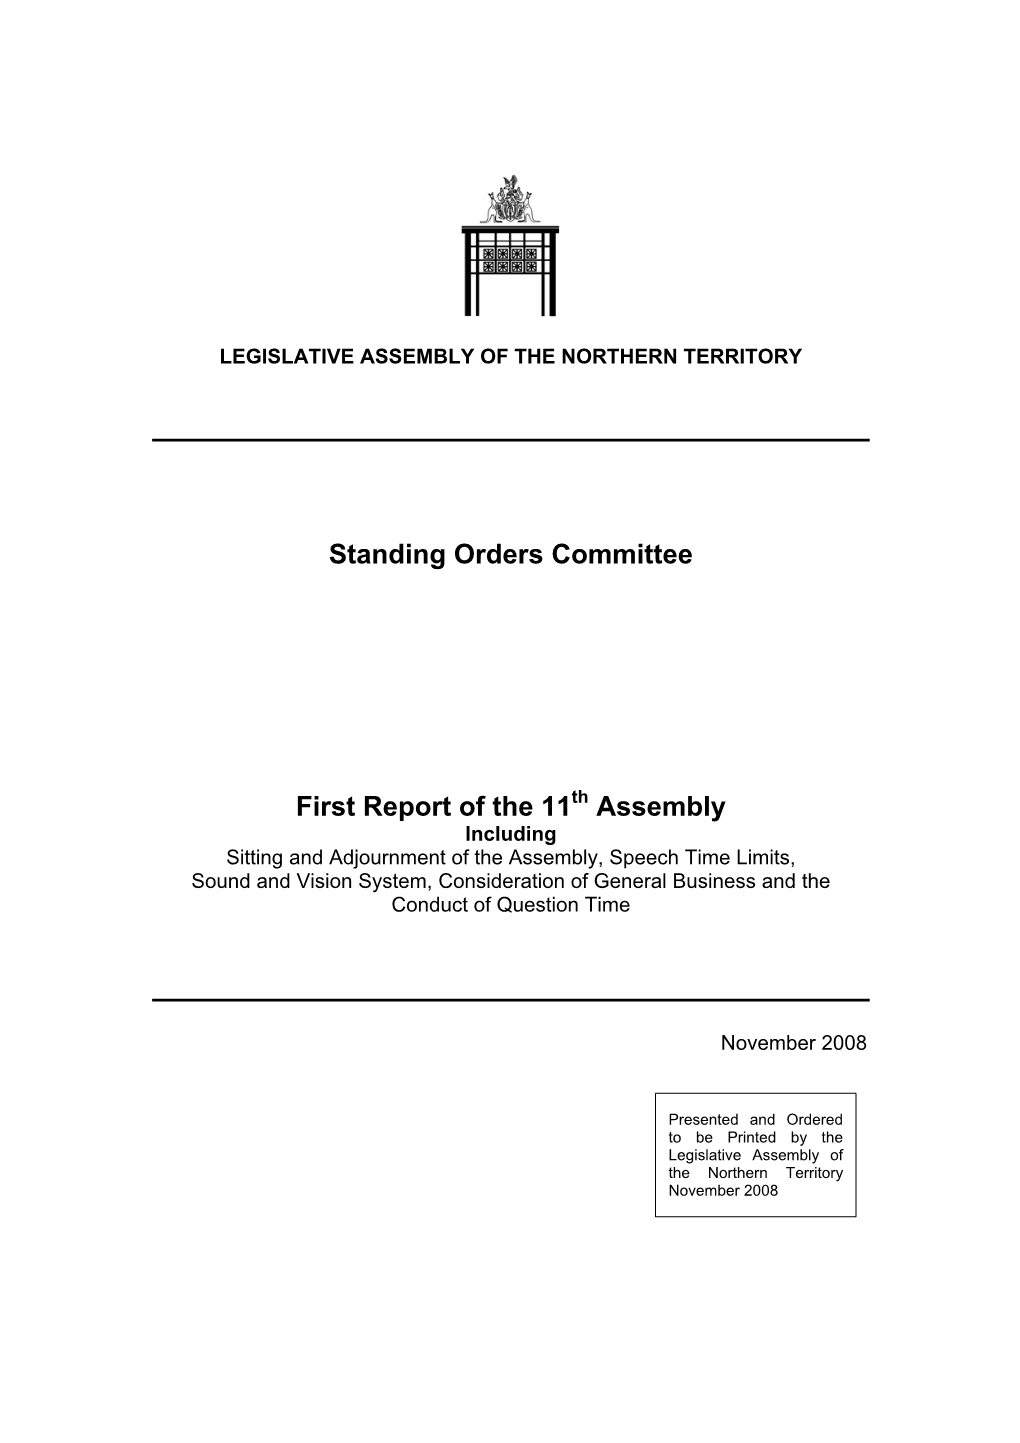 Report on Sitting and Adjournment of the Assembly